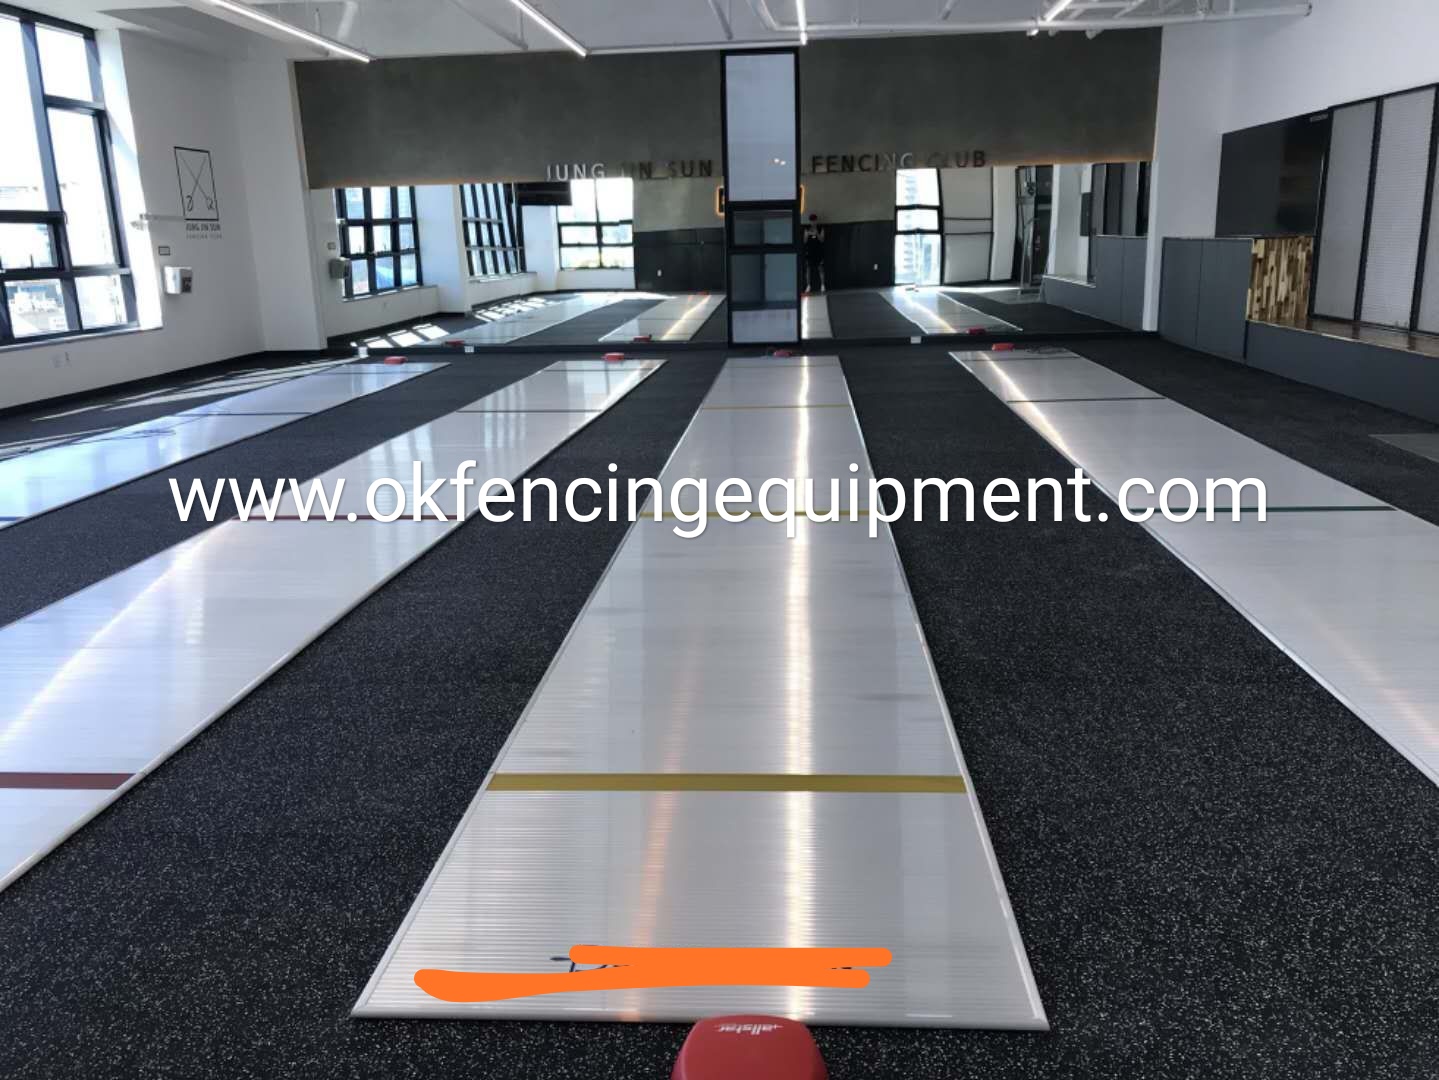 FIE aluminium alloy fencing piste from OK Fencing used for fencing club and fencing school